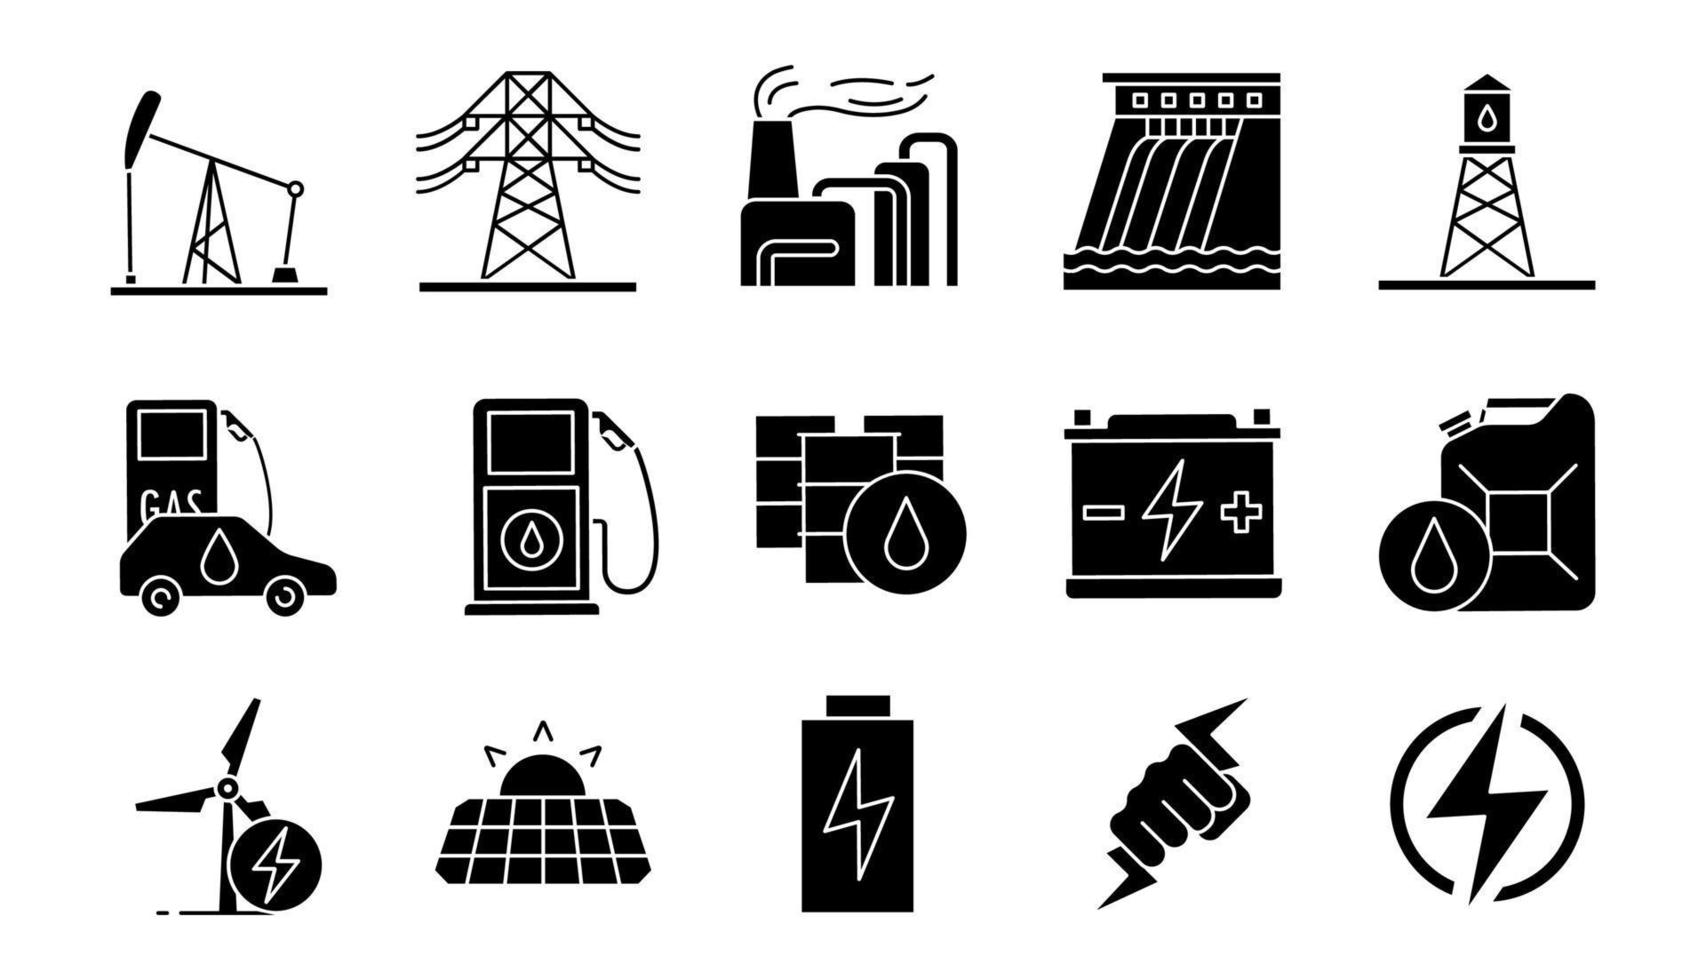 Electric energy glyph icons set. Electricity. Power generation and accumulation. Electric power industry. Alternative energy resources. Silhouette symbols. Vector isolated illustration